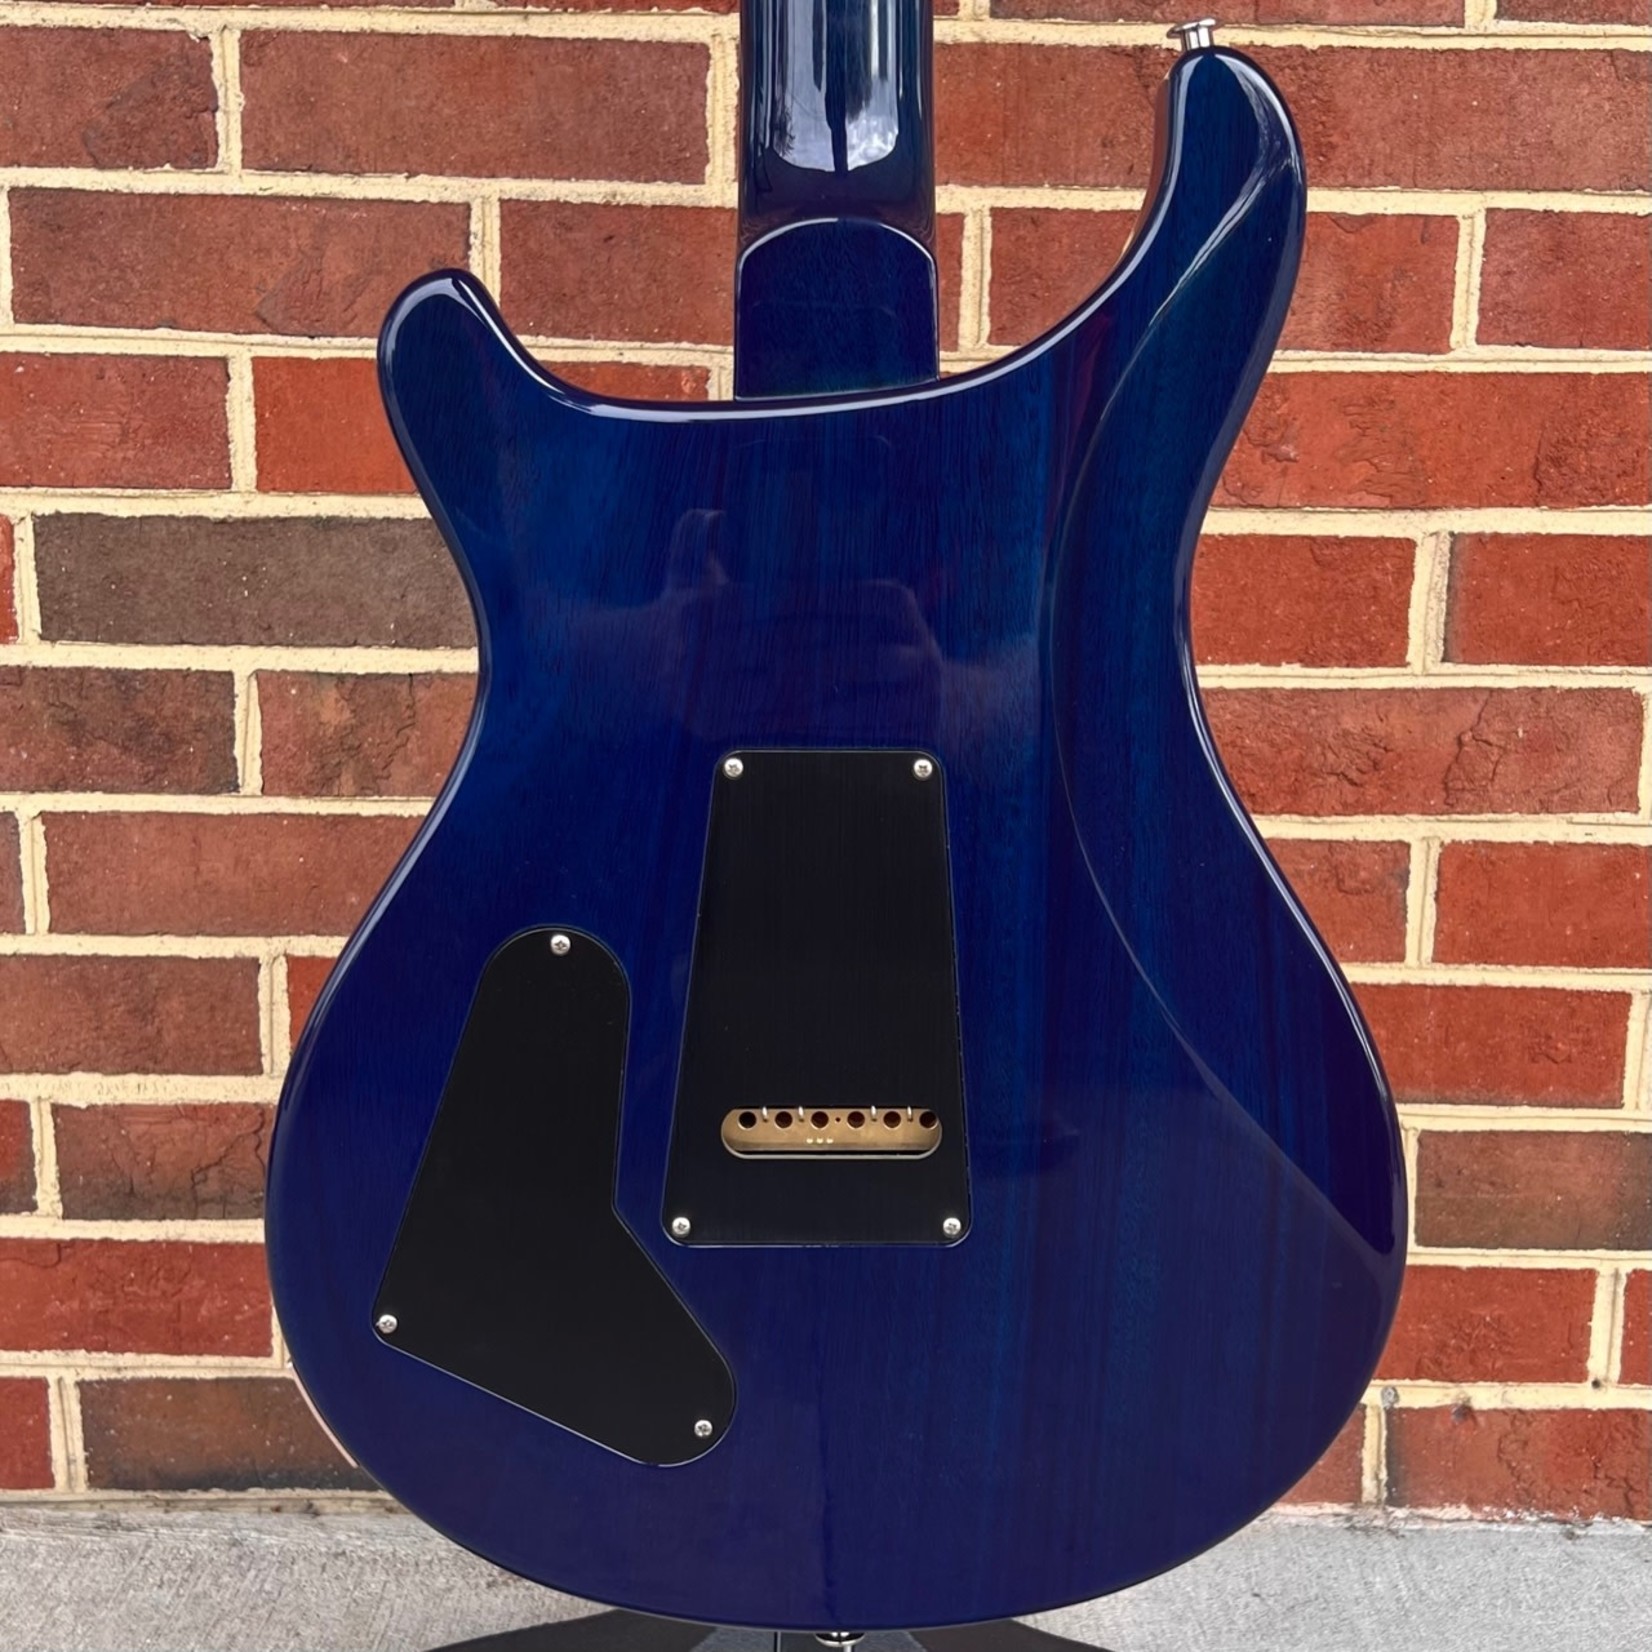 Paul Reed Smith Paul Reed Smith Special Semi-Hollow, Custom Color - Charcoal Blue Wrap Burst, Nickel Hardware, Hardshell Case